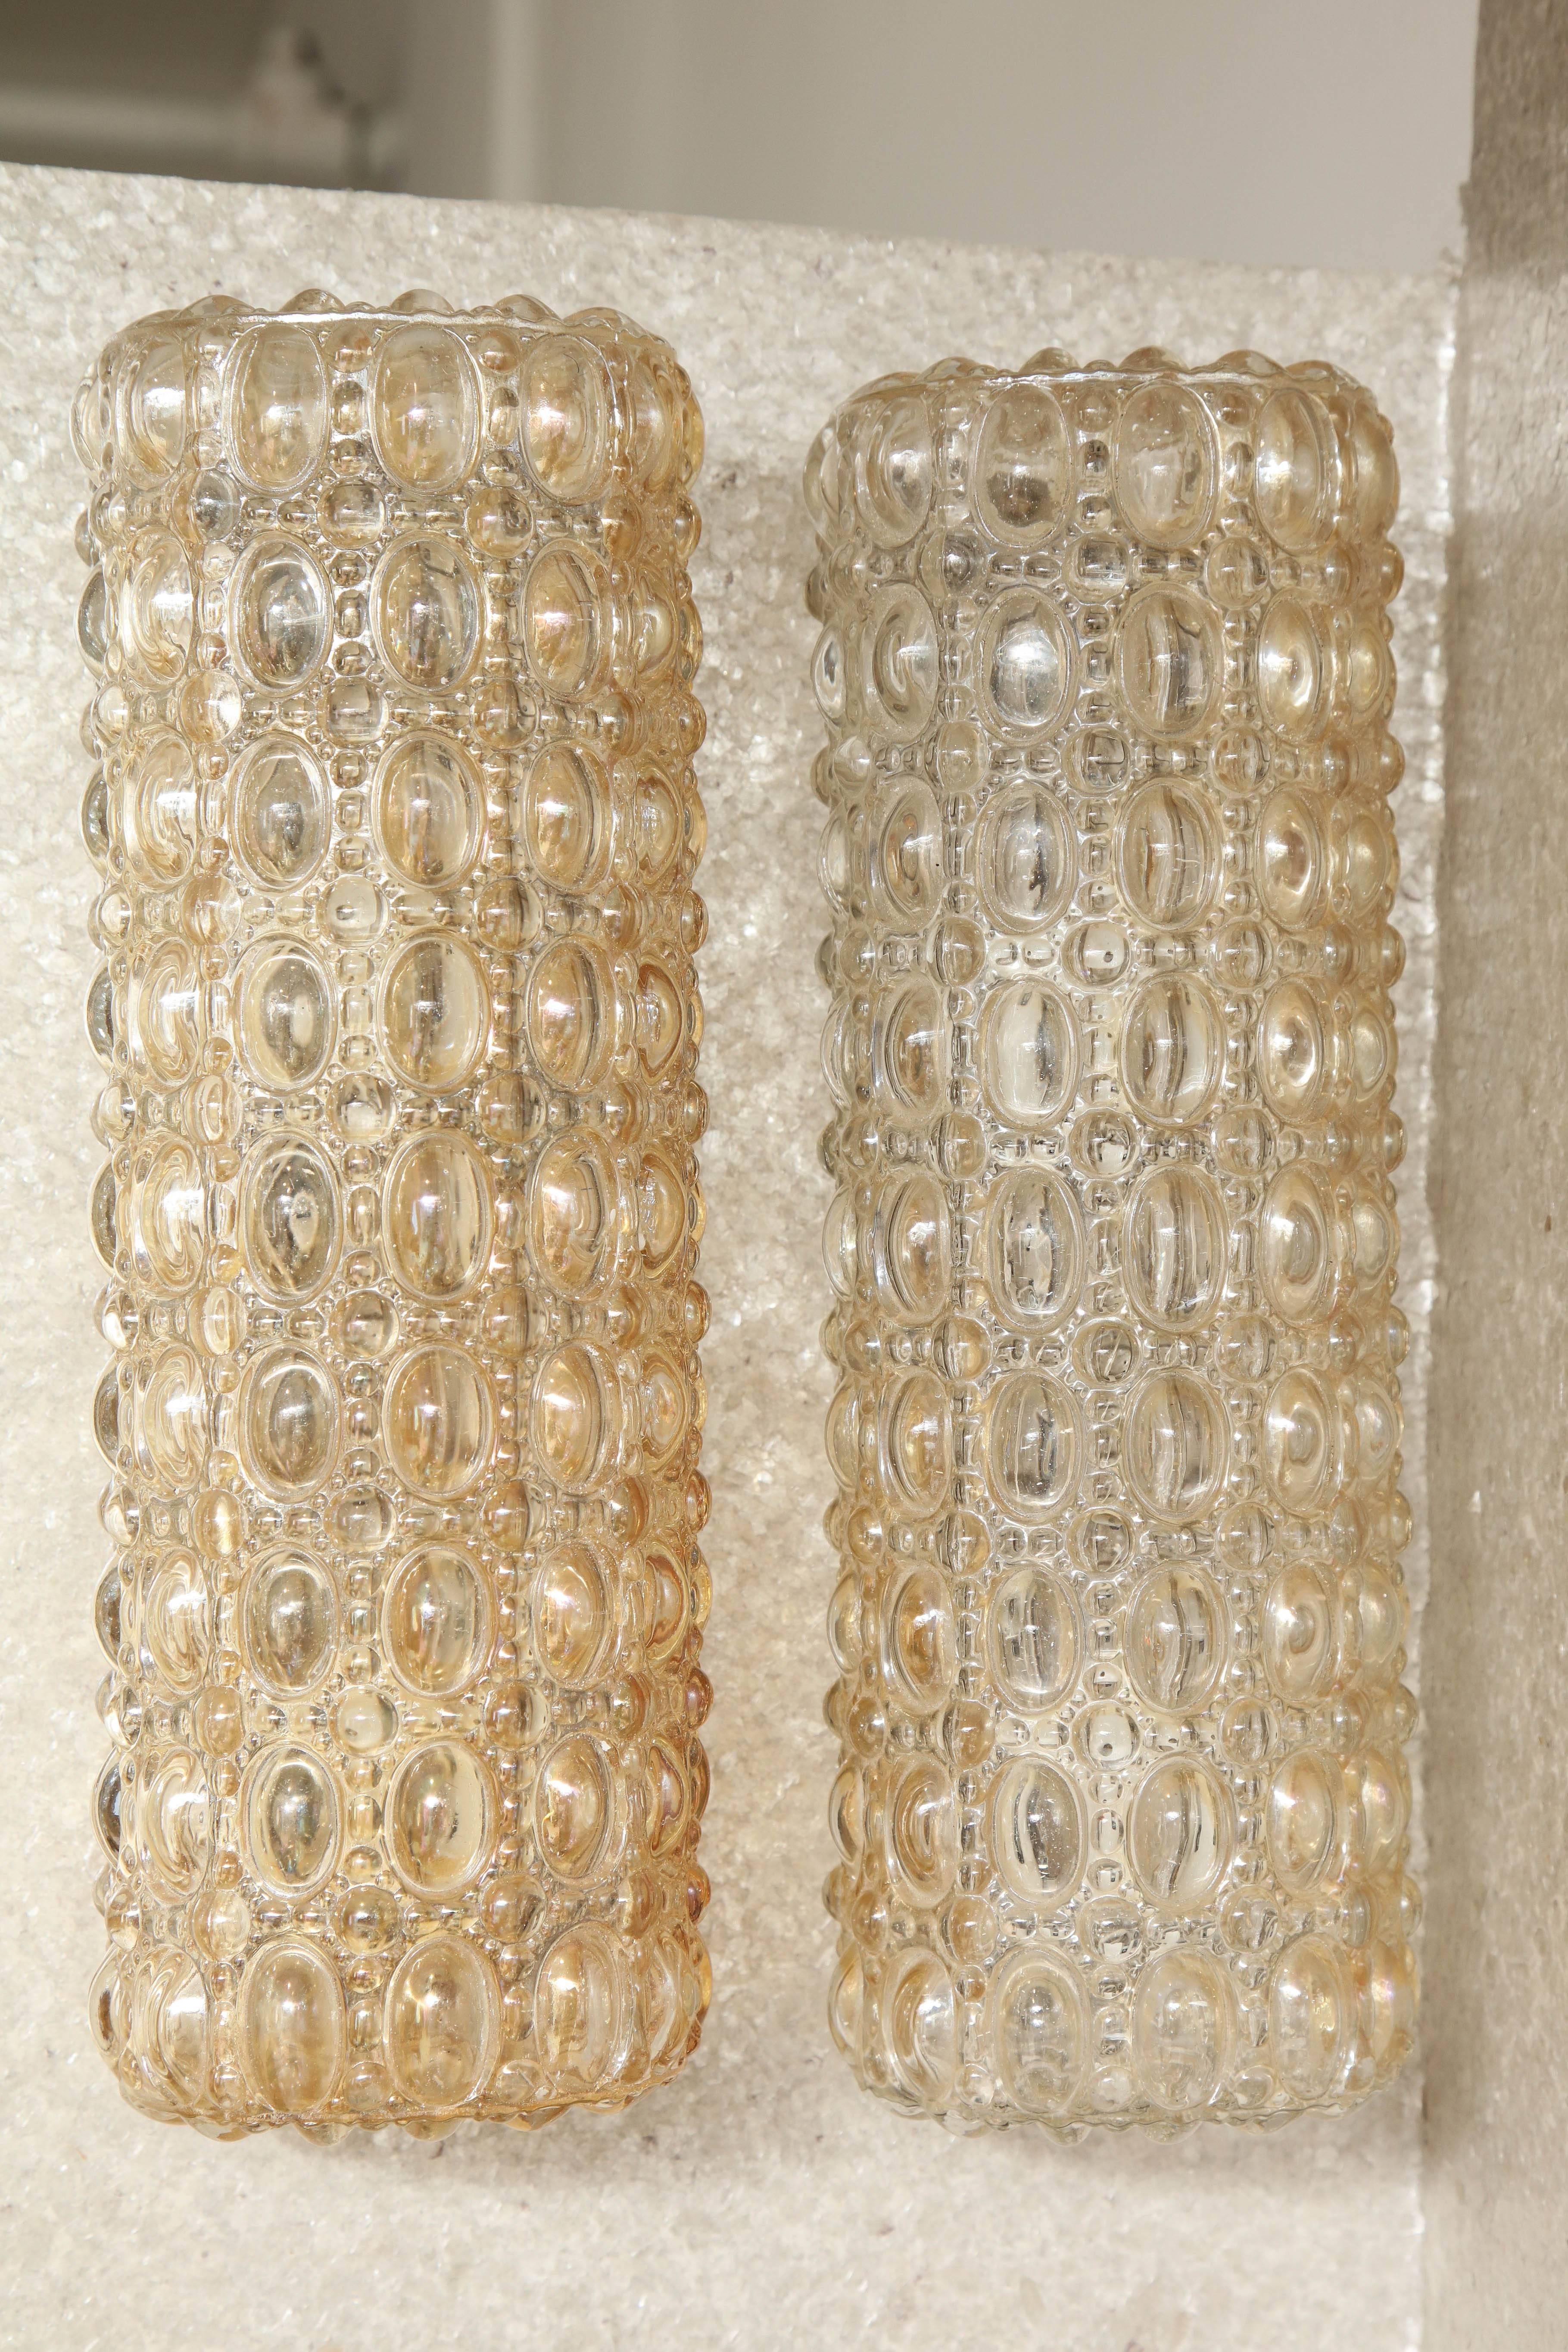 Pair of rectangular champagne colored glass sconces with a raised oval bubble pattern on satin nickel plates. Rewired for use in the USA. Each sconce has two-light sources.